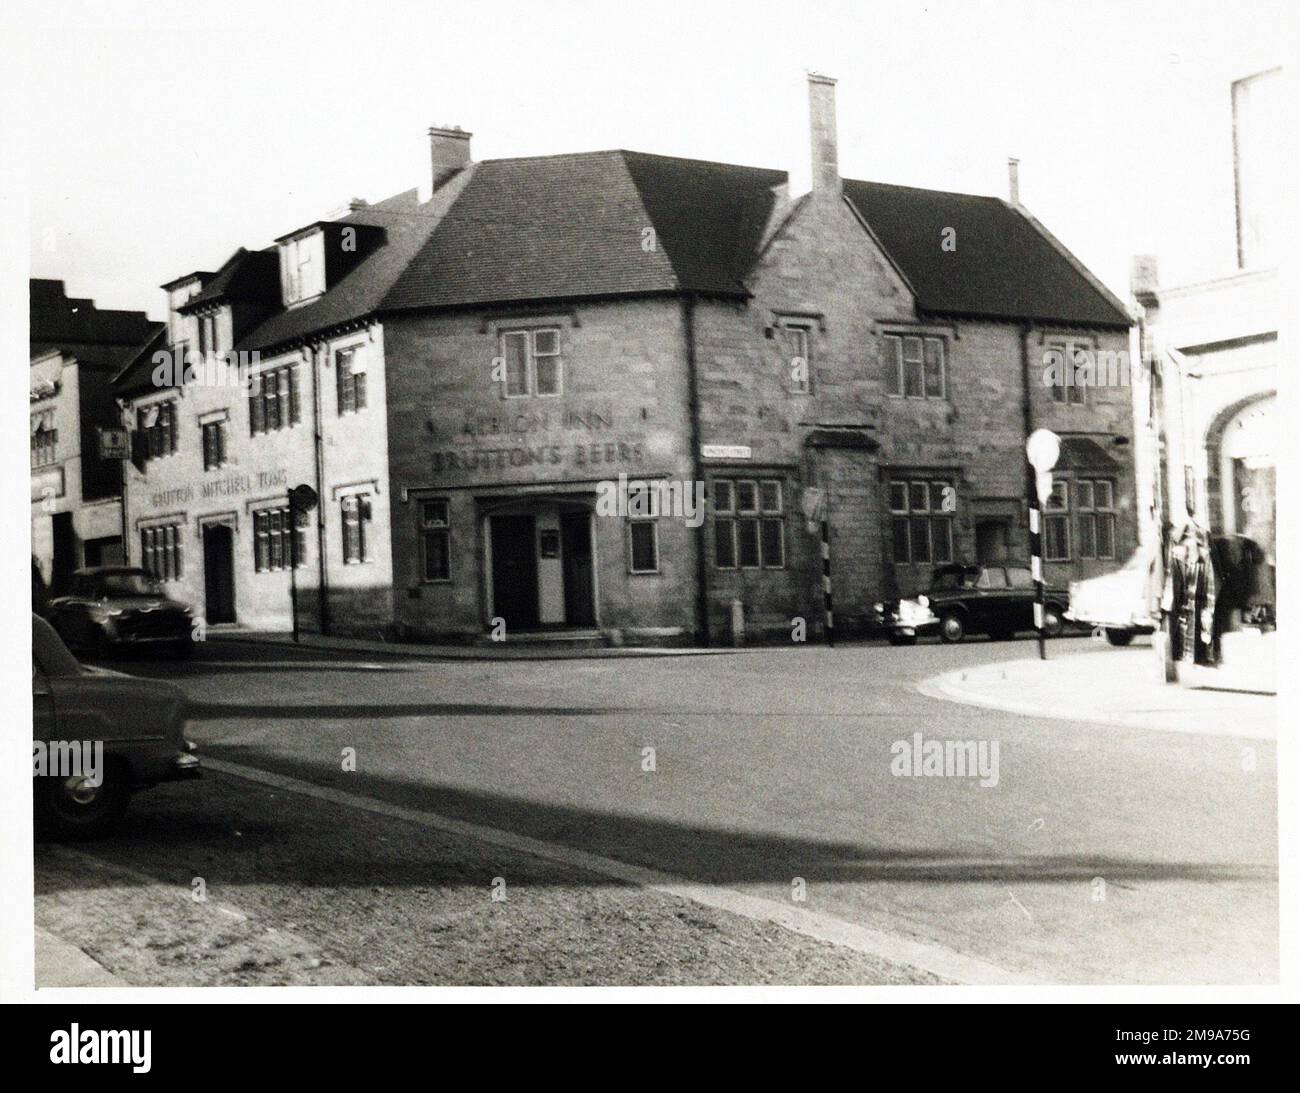 Photograph of Albion Inn, Yeovil, Somerset. The main side of the print (shown here) depicts: Corner on view of the pub.  The back of the print (available on request) details:  Publican ID for the Albion Inn, Yeovil, Somerset BA20 1EU. As of July 2018 . Area demolished for shopping mall. Vicarge Street ran between Silver Street and Middle Street Stock Photo